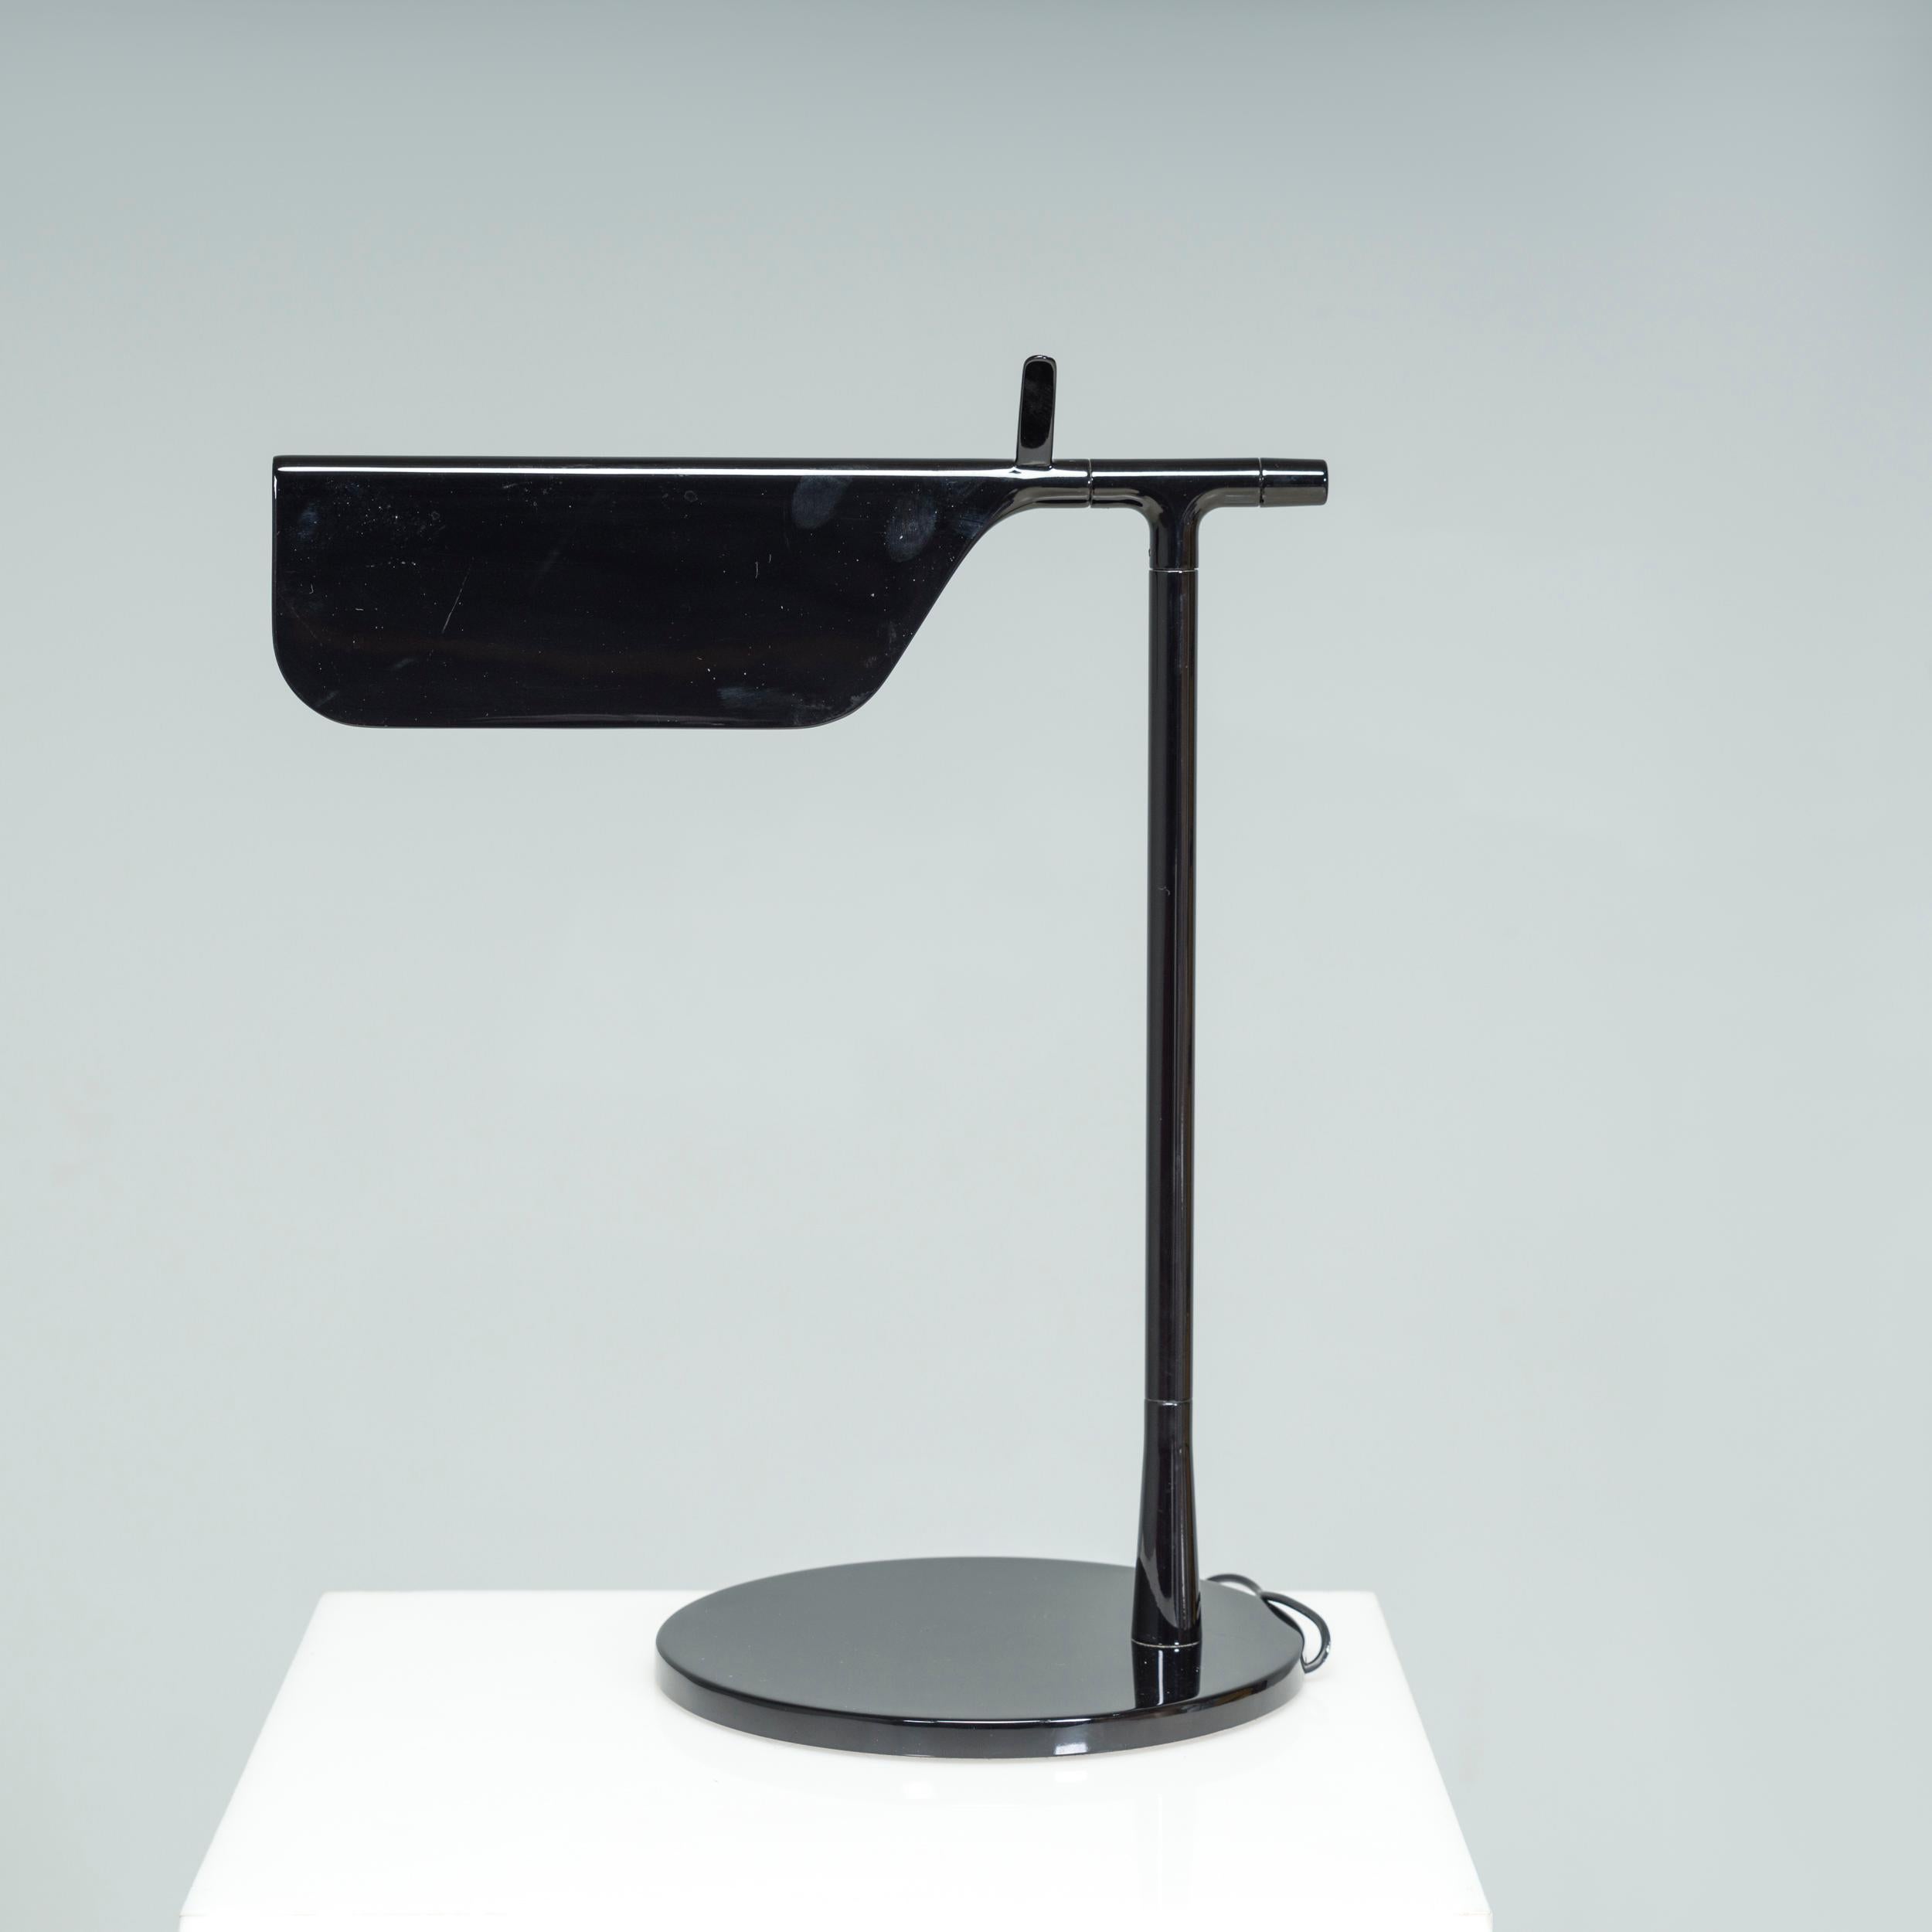 Chinese Edward Barber & Jay Osgerby for Flos Black Tab Table Lamp For Sale